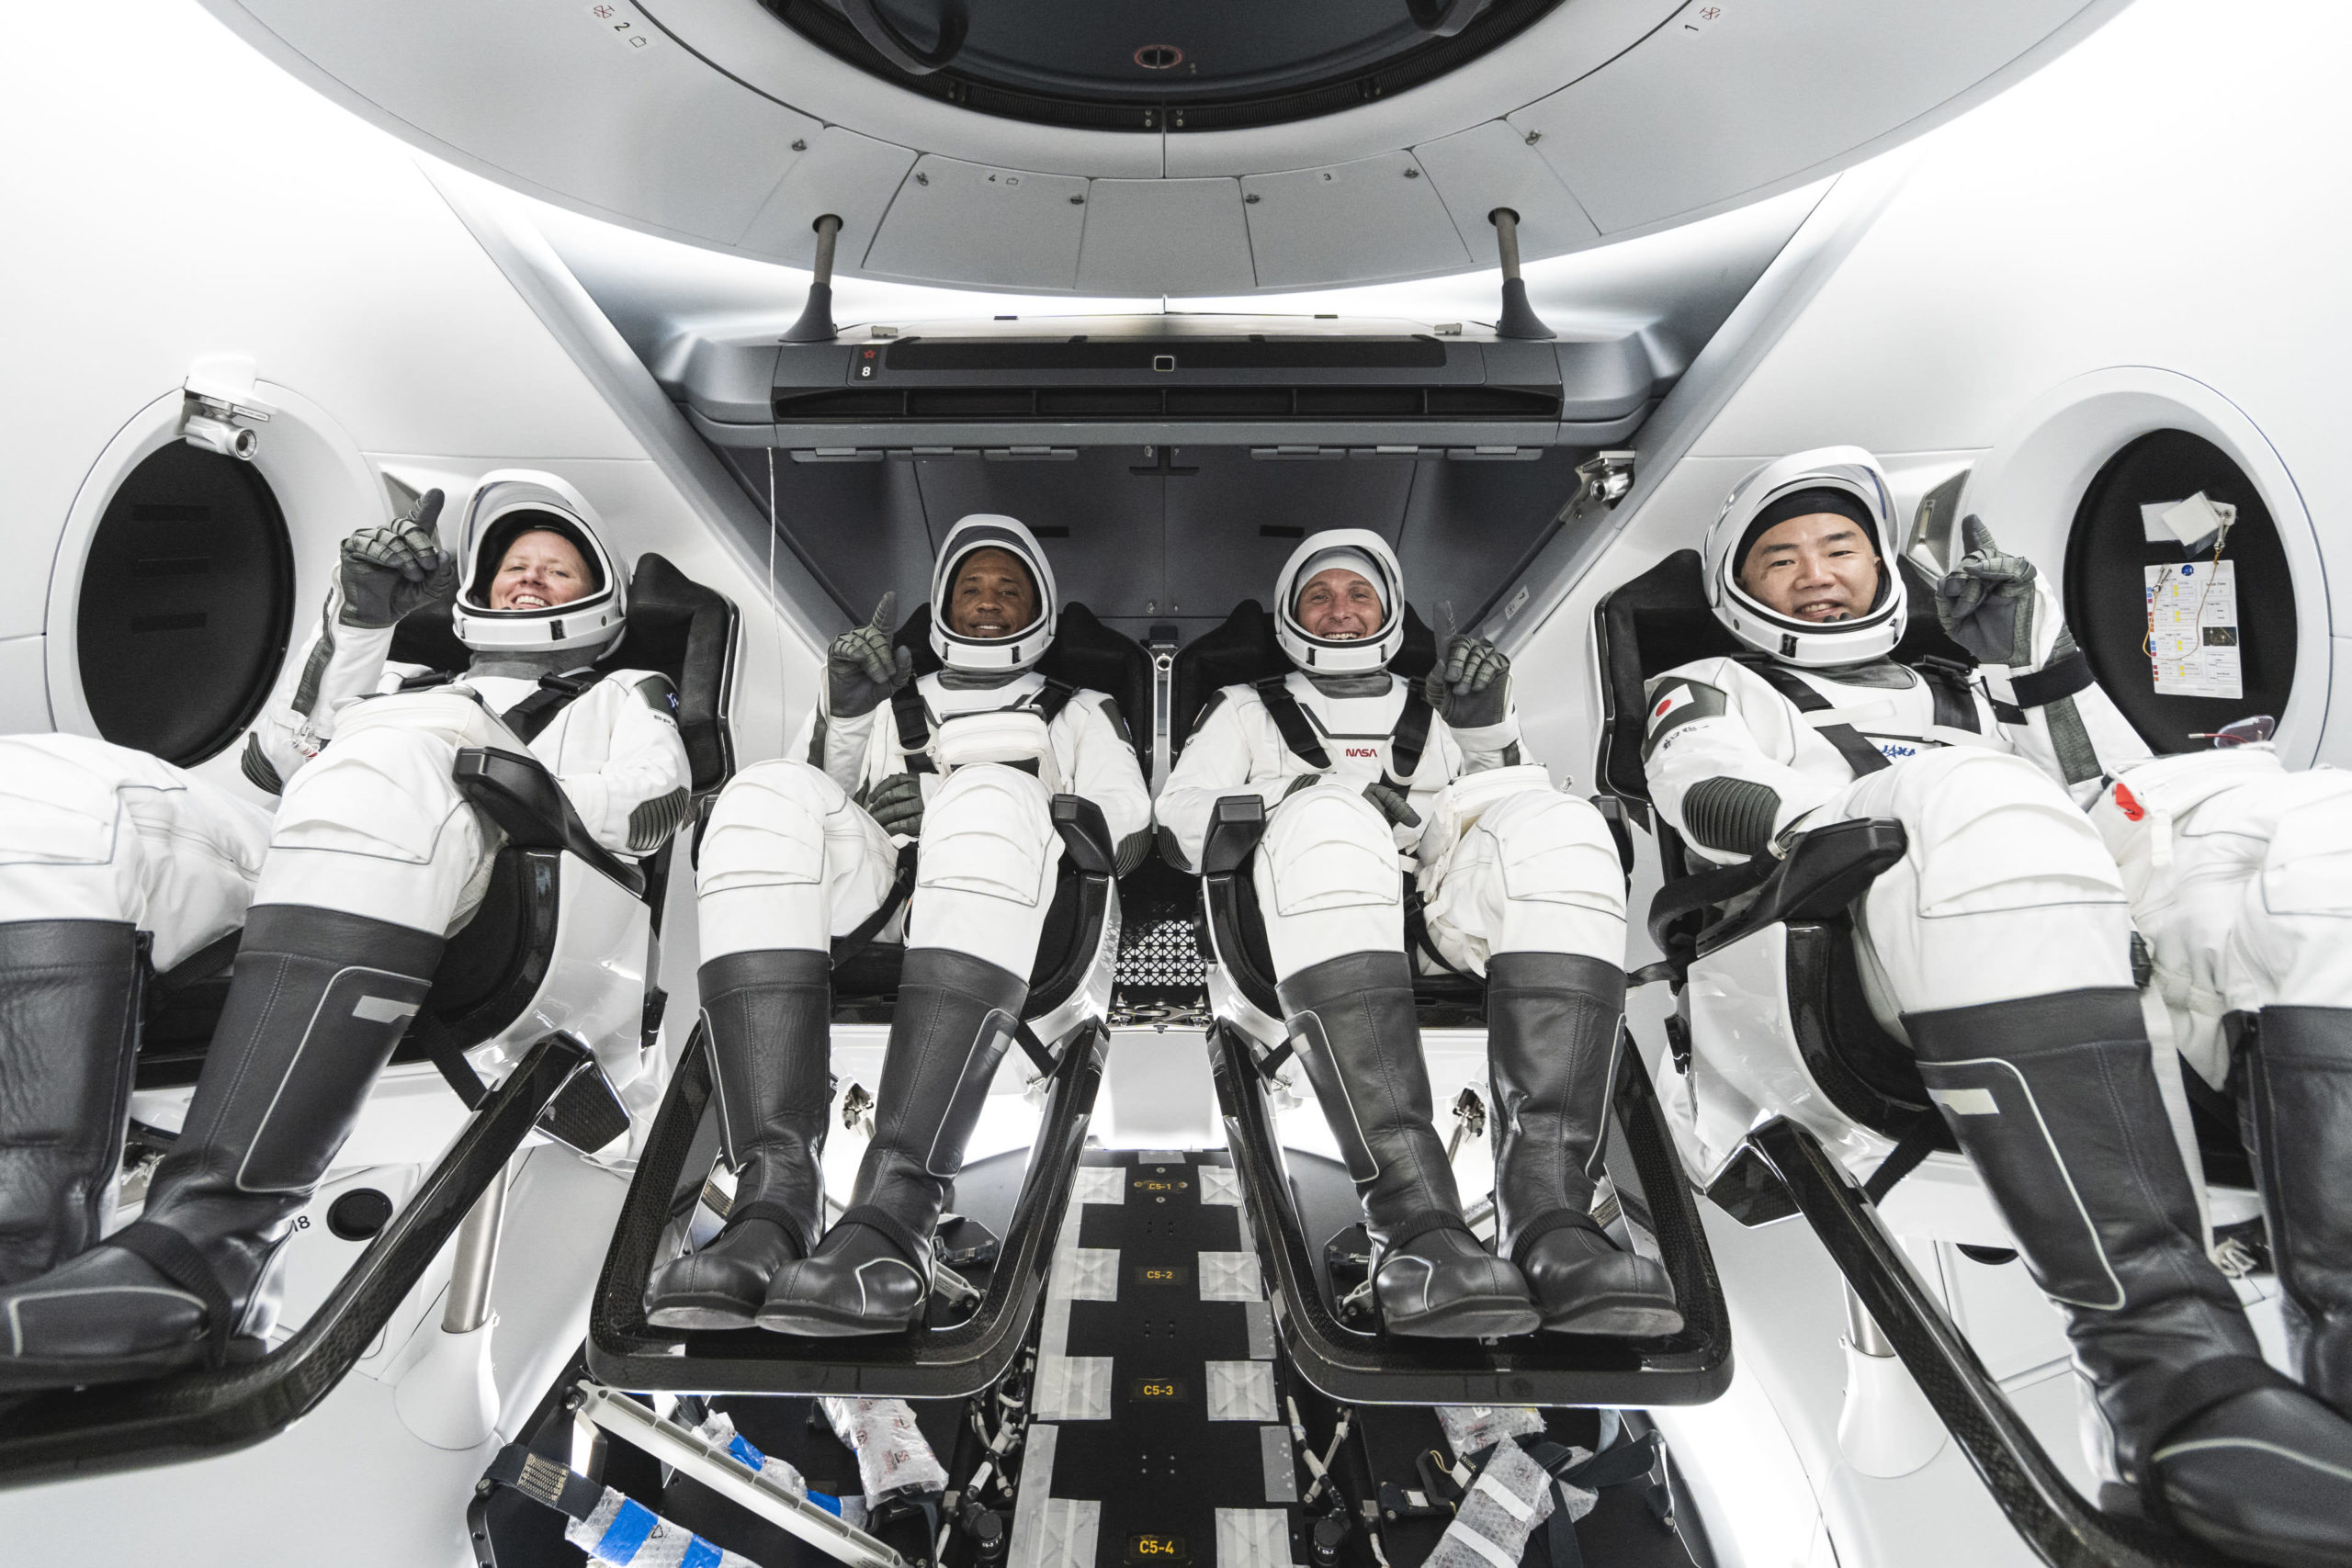 SpaceX Crew-1 full astronaut mission launching on October 23